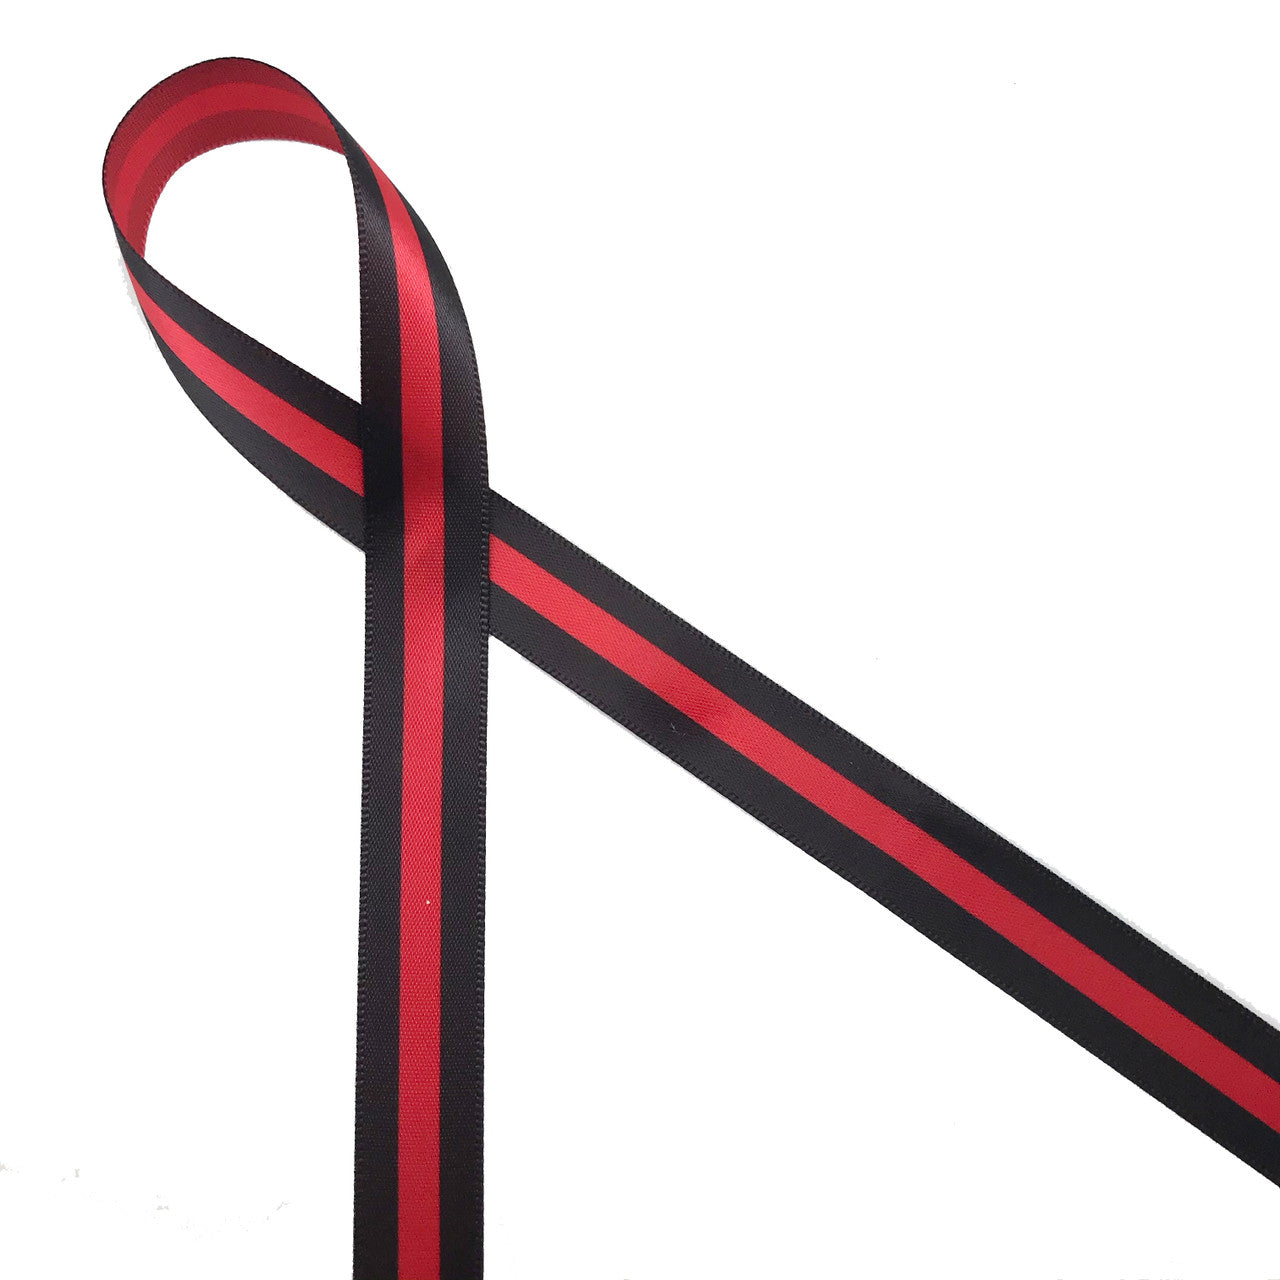 This item is unavailable -   Red ribbon, Satin ribbon, Red satin